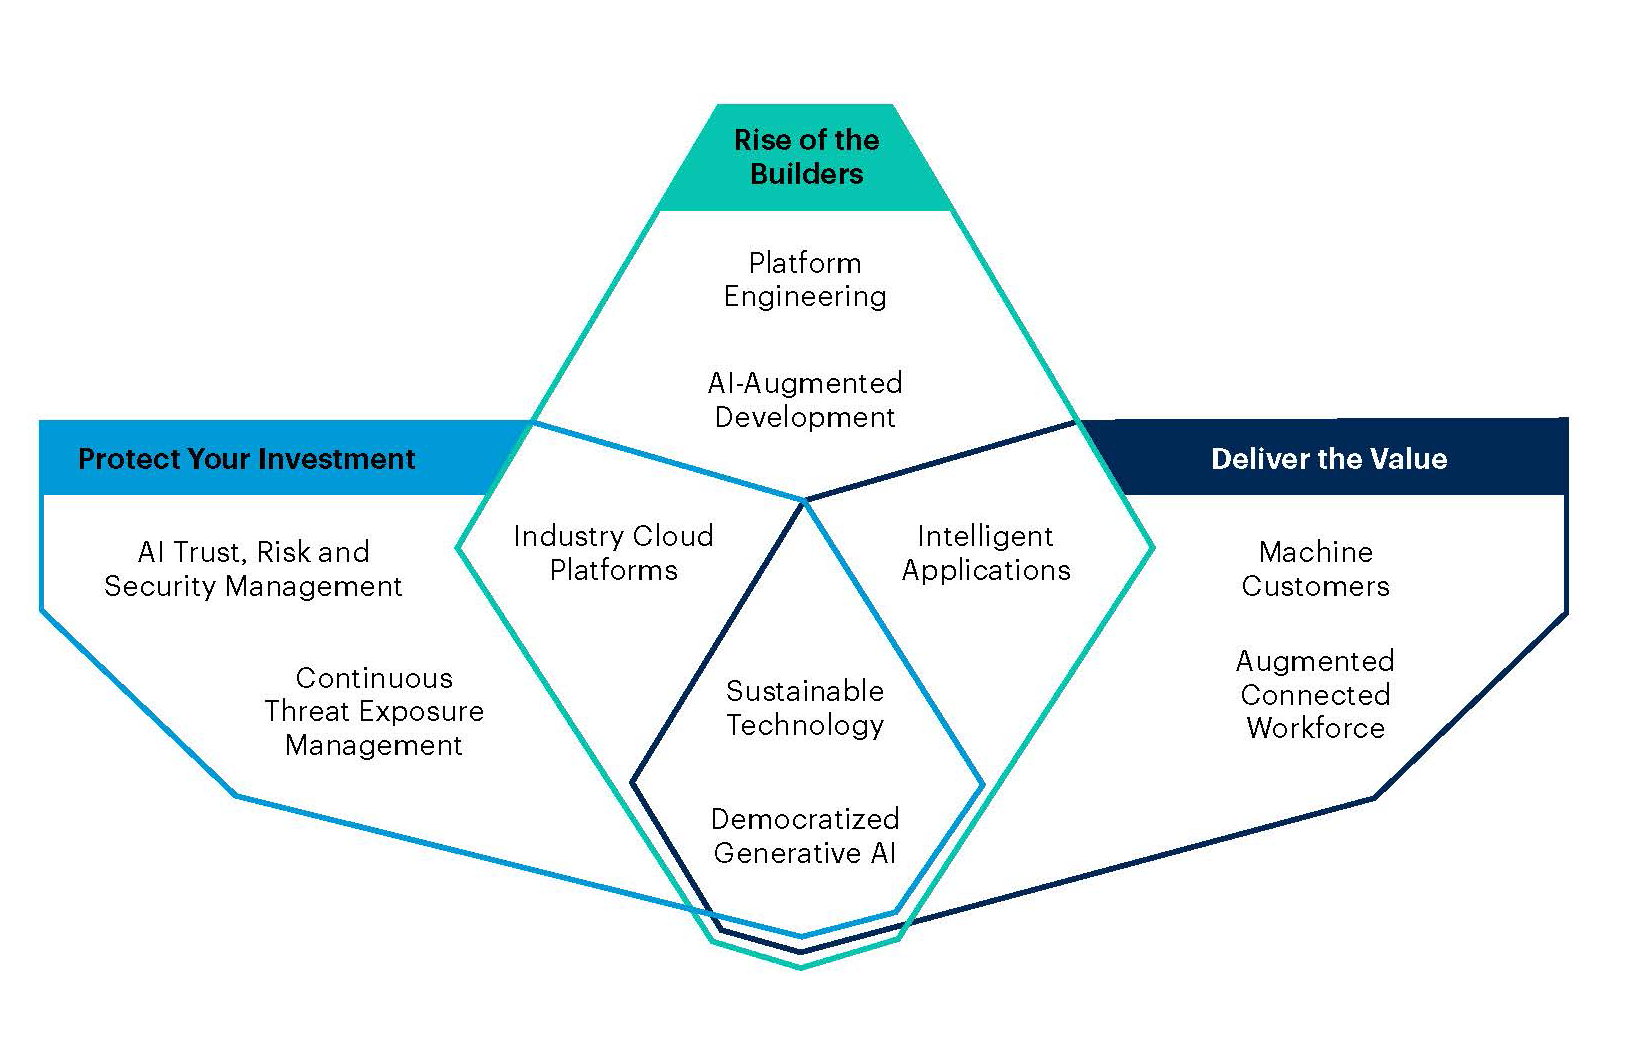 Gartner expects these 10 trends, which each fall into one or more categories, to factor into many business and technology decisions over the next 36 months. Cr: Gartner